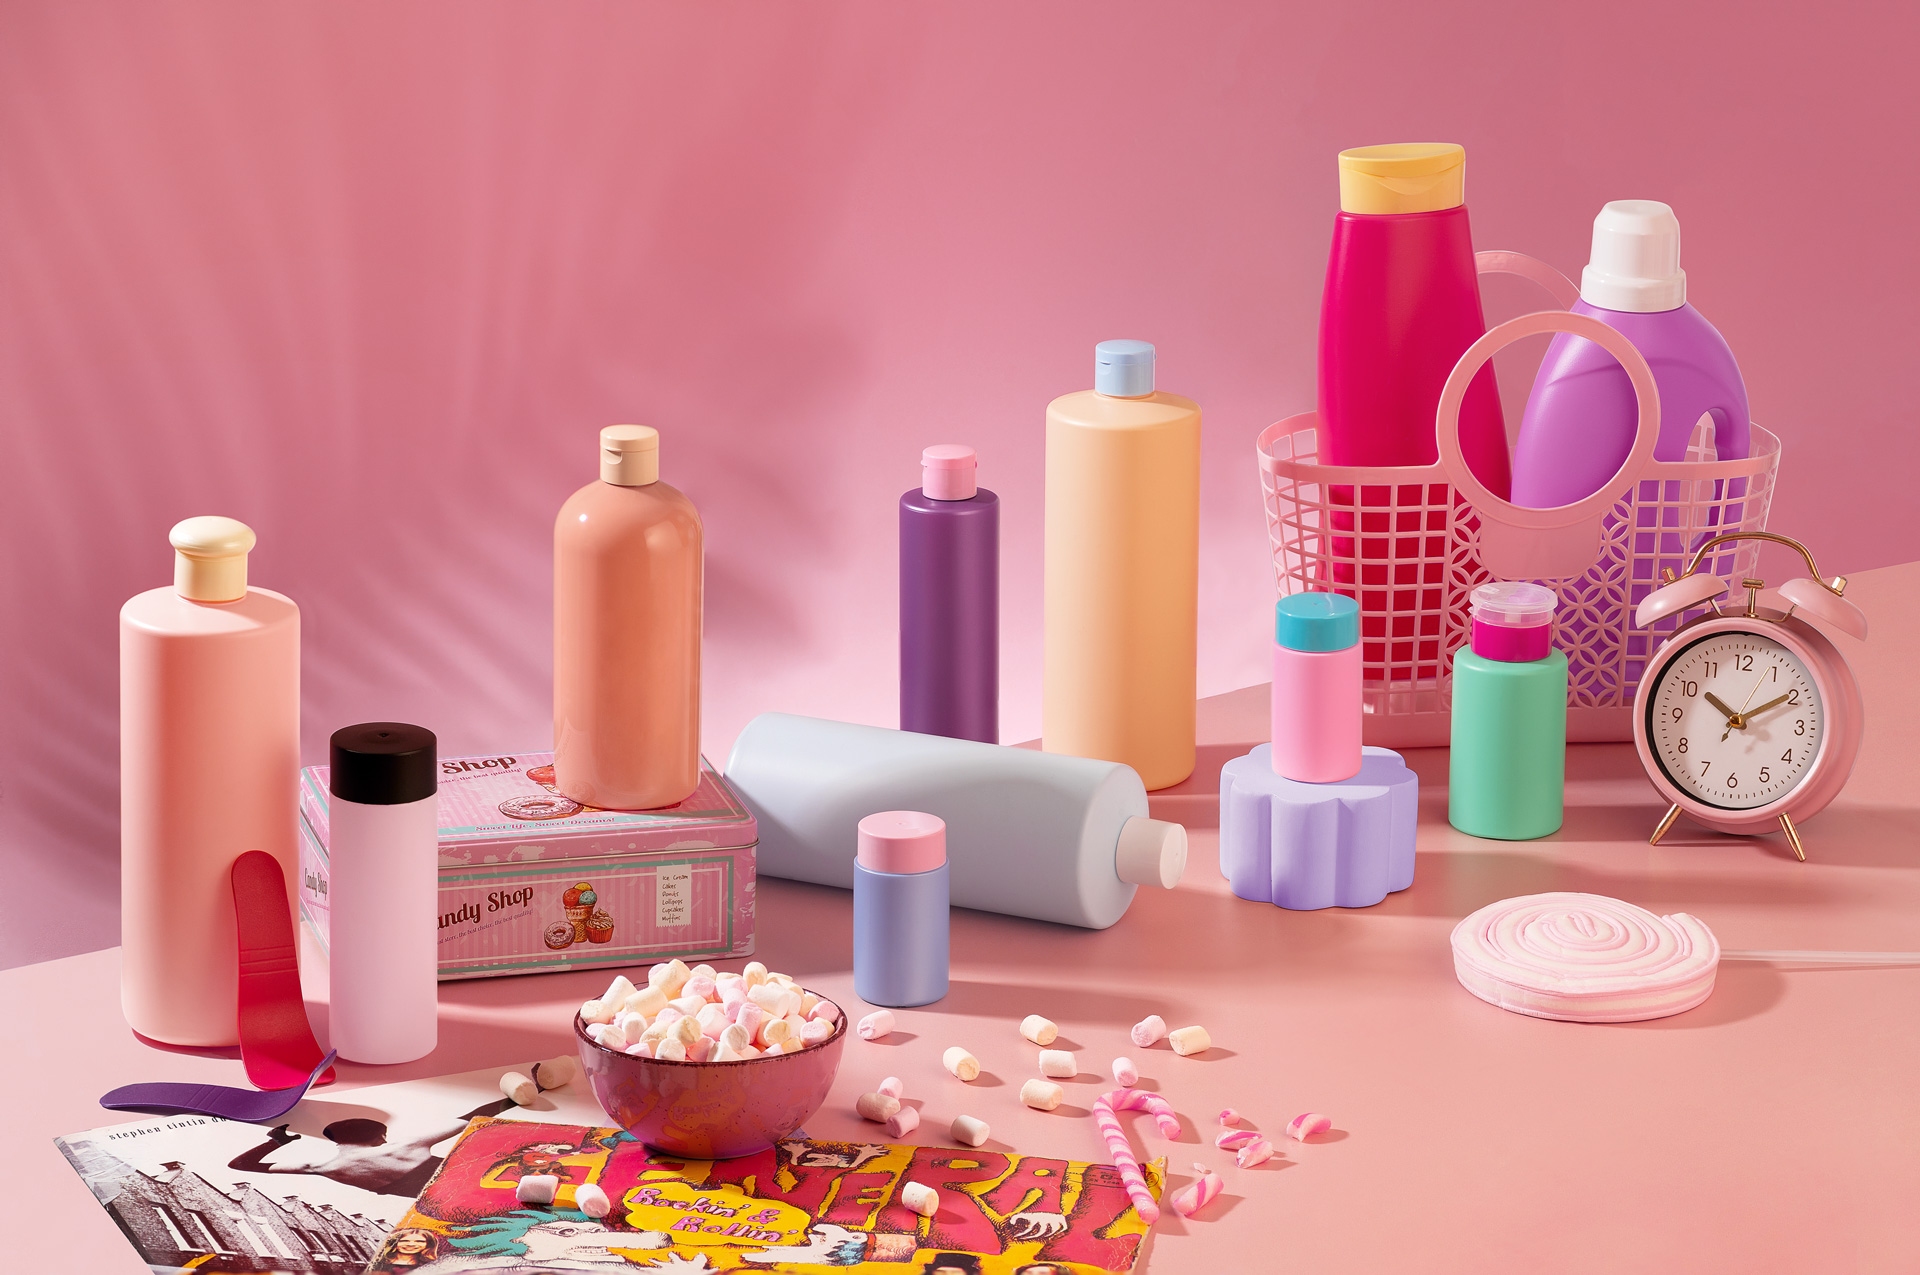 Product photography and creative styling for brands in candy mood